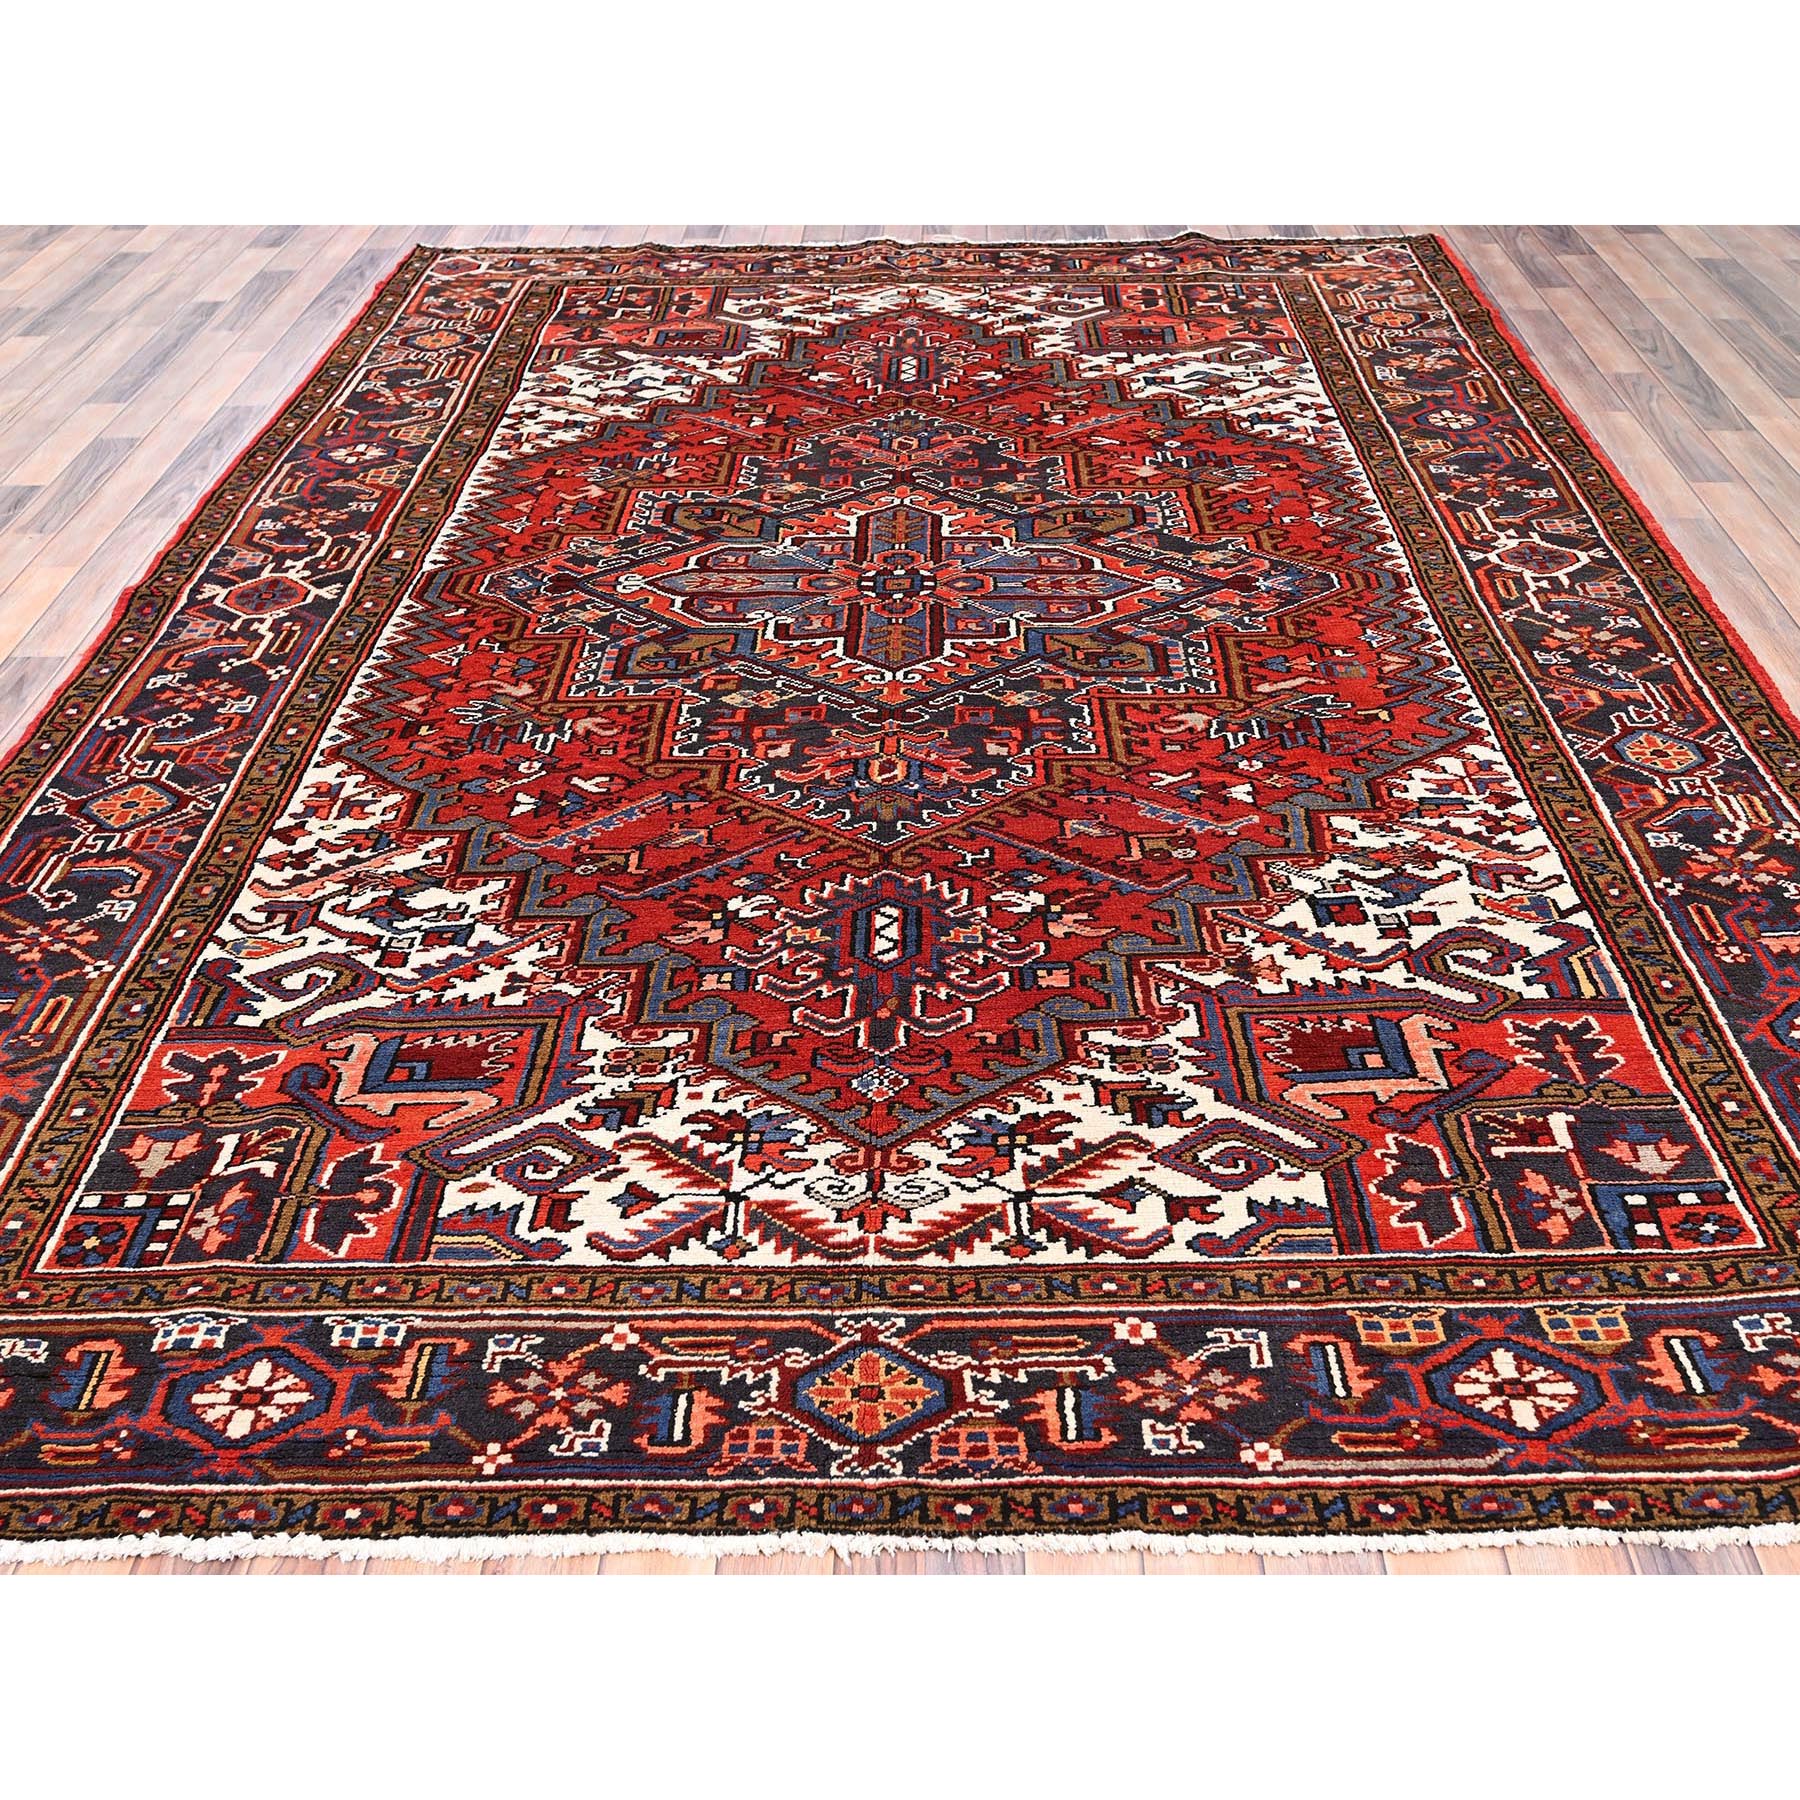 8'1"x11'1" Imperial Red, Semi Antique Persian Heriz with Village Motif, Good Condition, Rustic Feel, Worn Wool, Hand Woven, Oriental Rug 